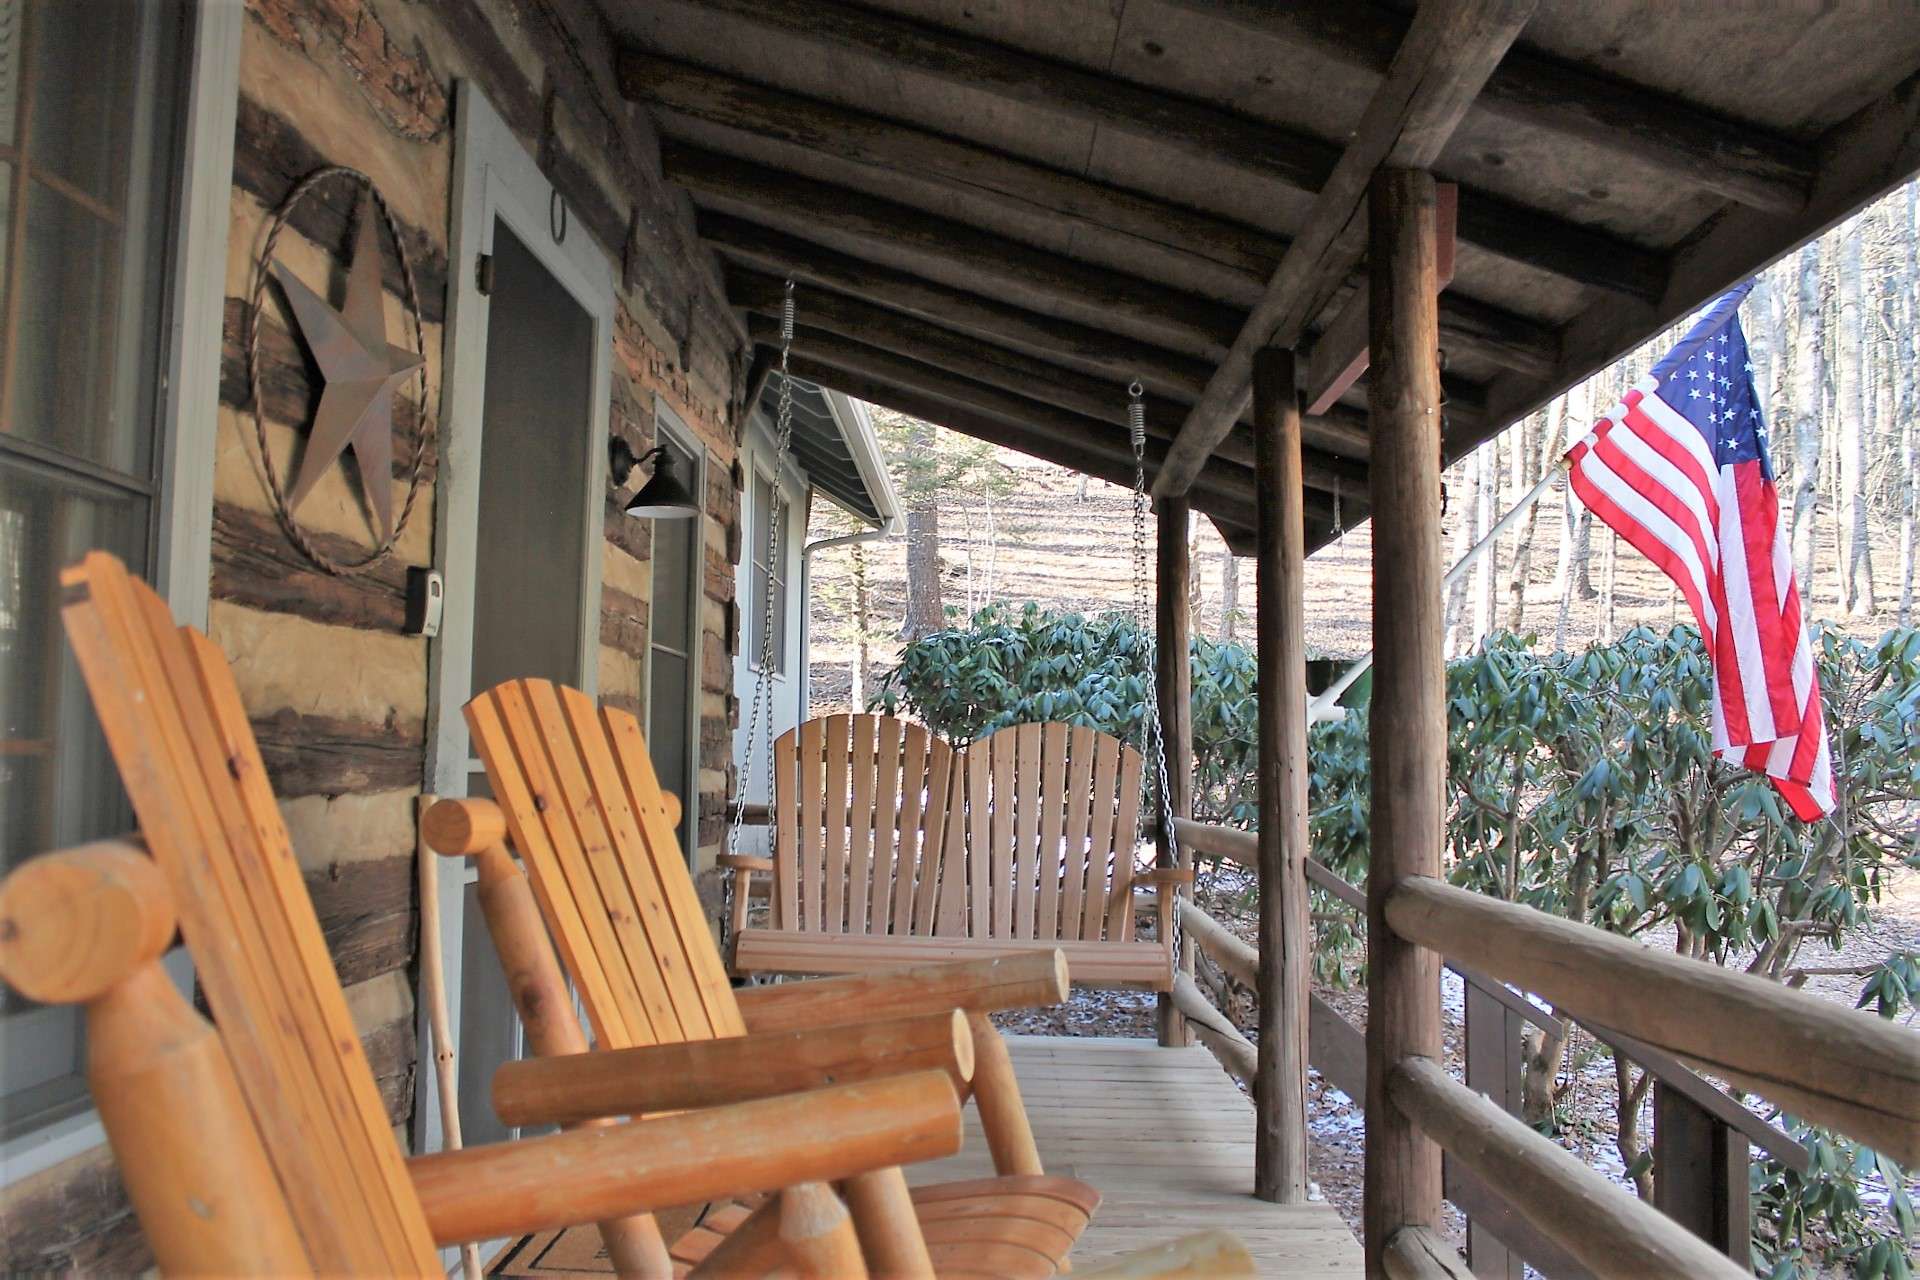 Relax and sit back on the covered front porch and catch up with your neighbors.